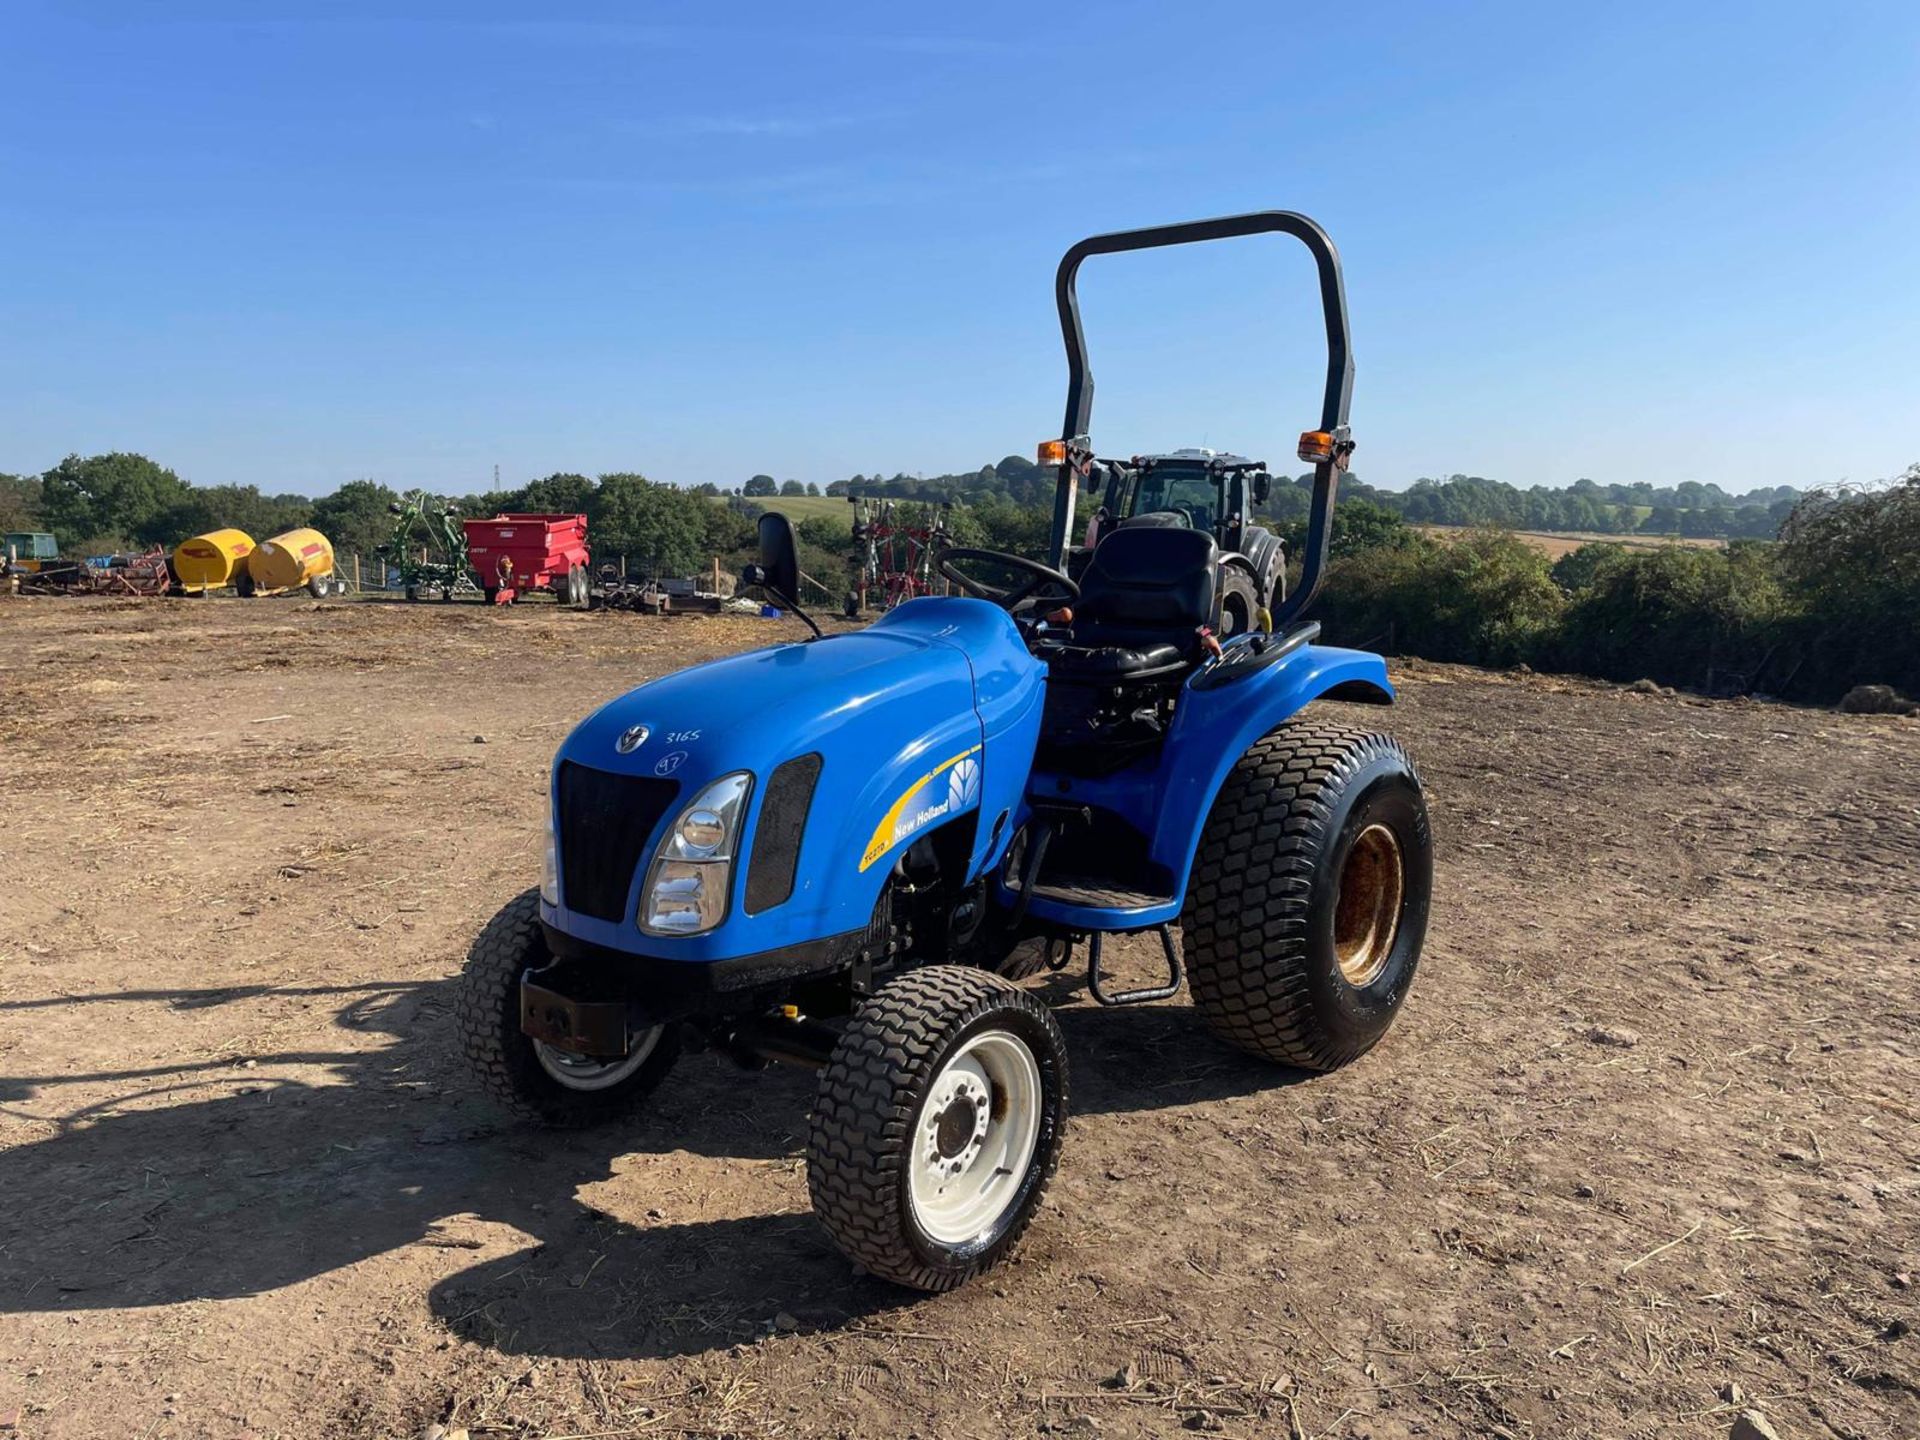 2005 NEW HOLLAND TC27DA 27hp 4WD COMPACT TRACTOR, RUNS DRIVES AND WORKS WELL, ROAD REGISTERED - Image 3 of 13